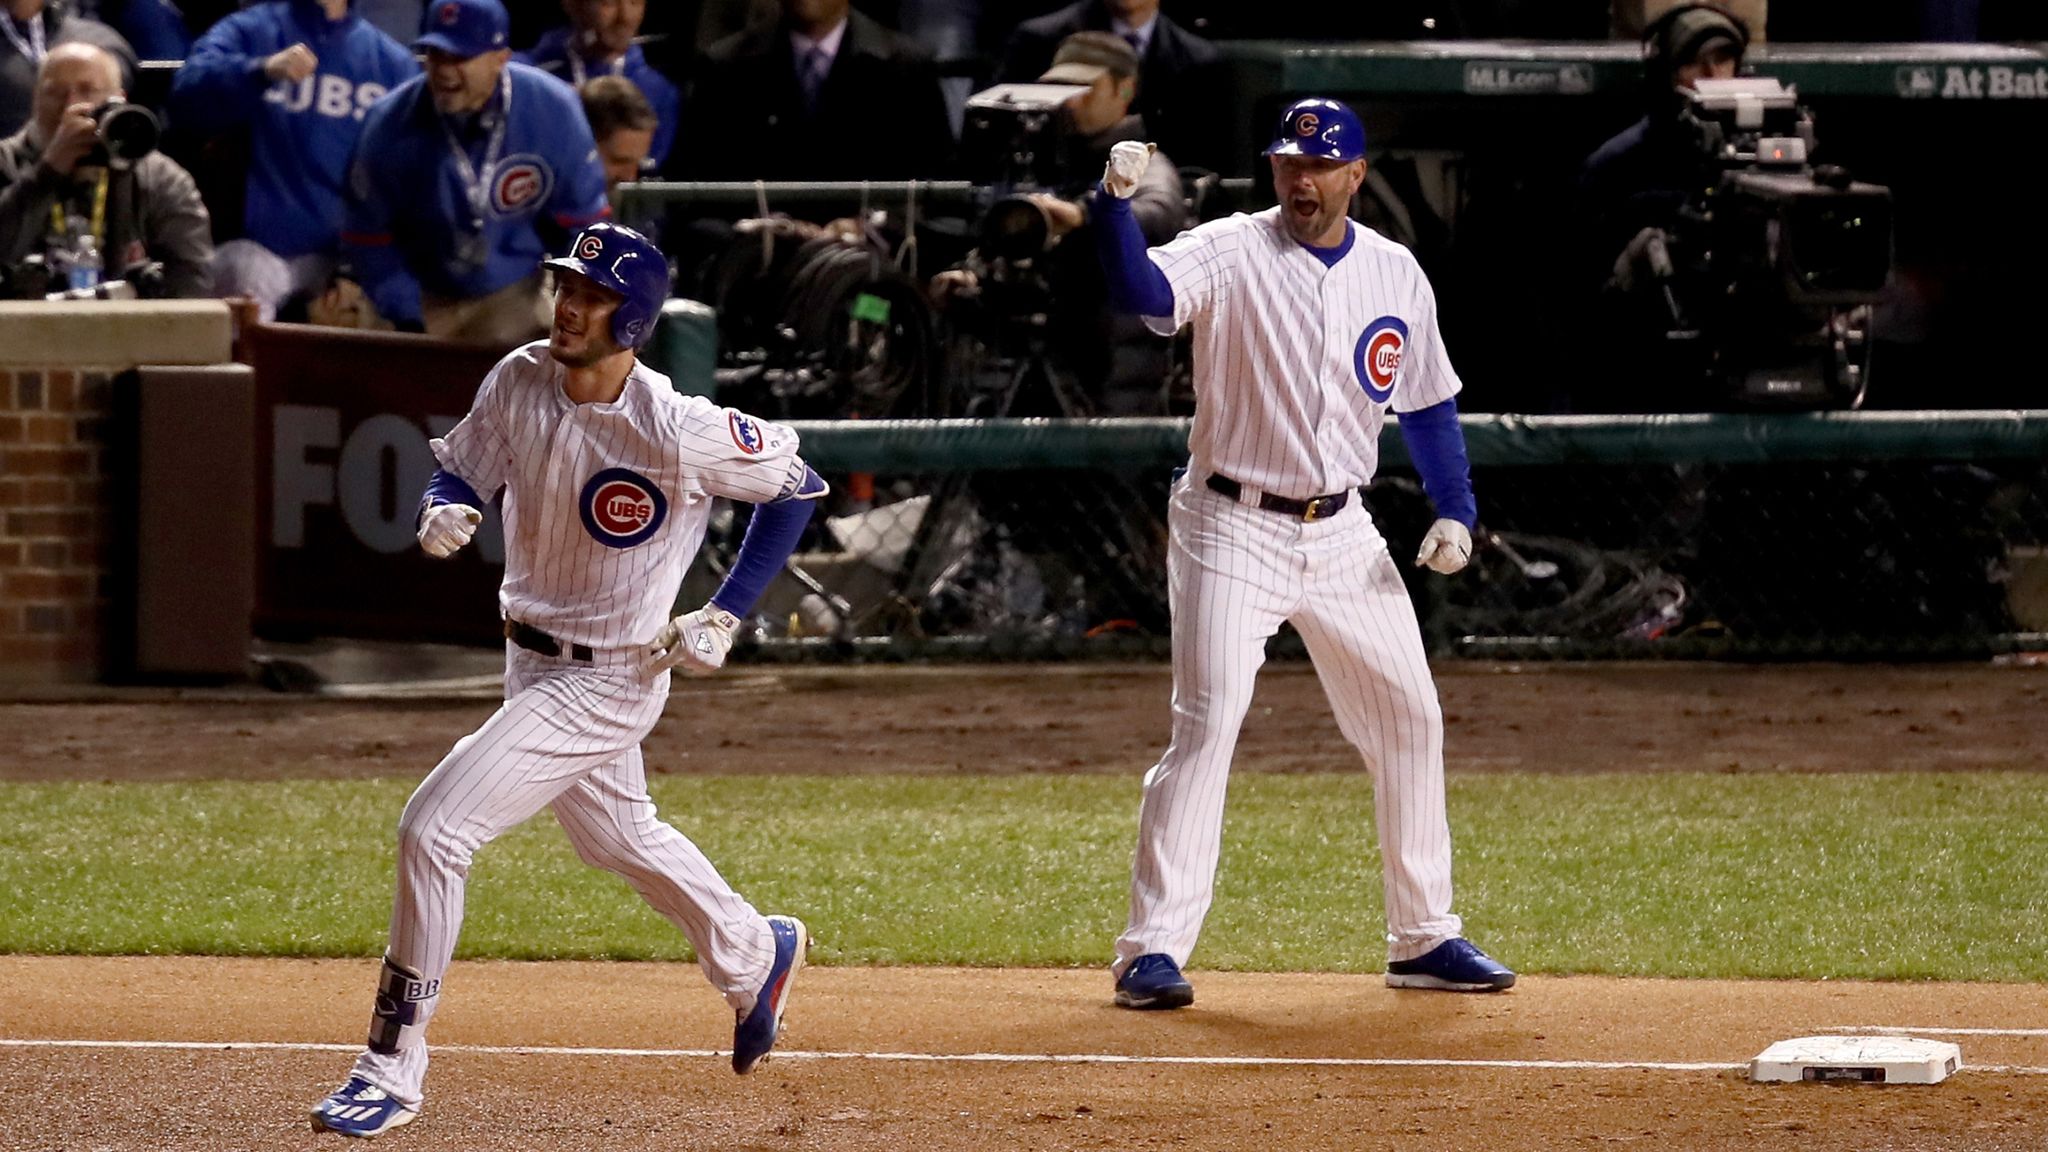 Cubs stay alive in World Series with 3-2 win in Game 5